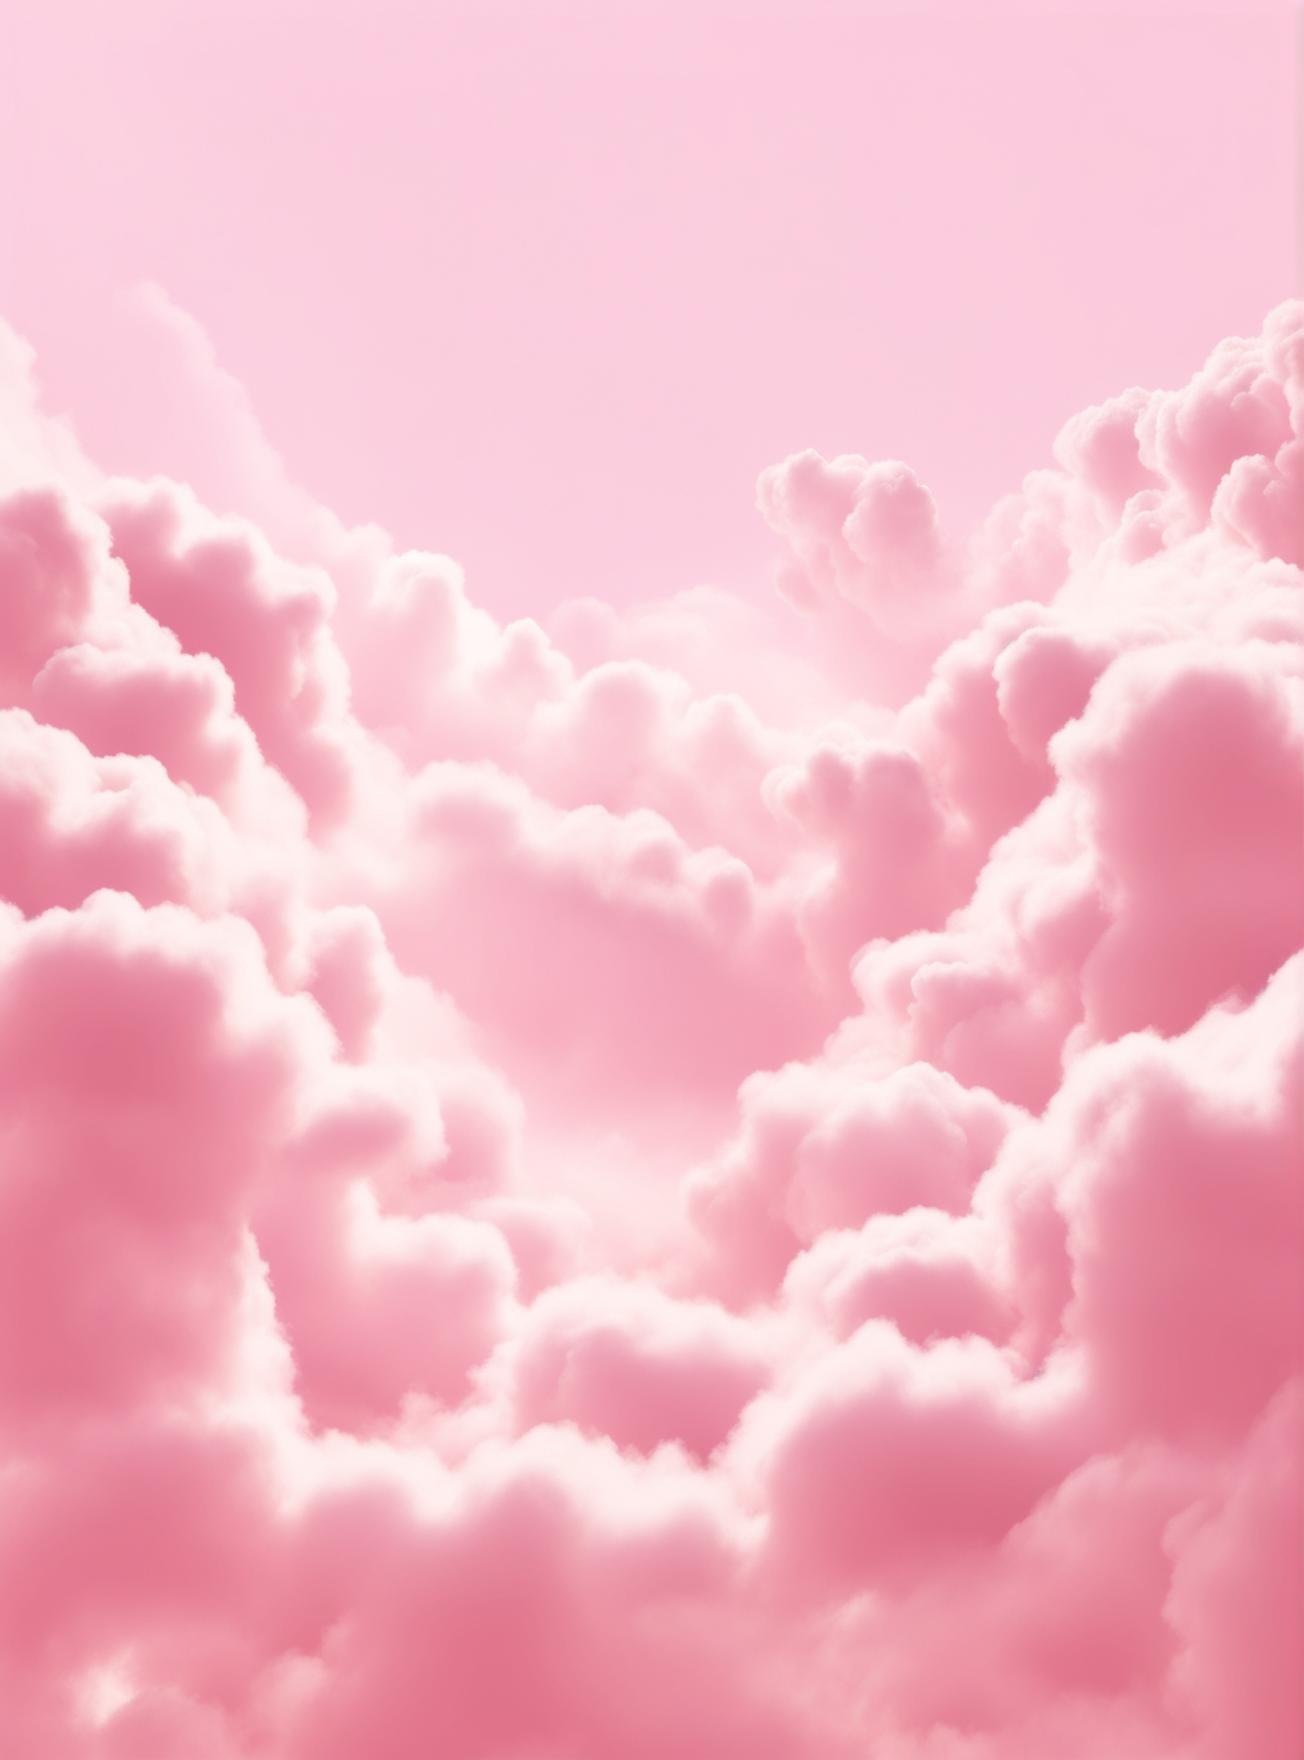 A beautiful wallpaper design with a light pink cloudy background.